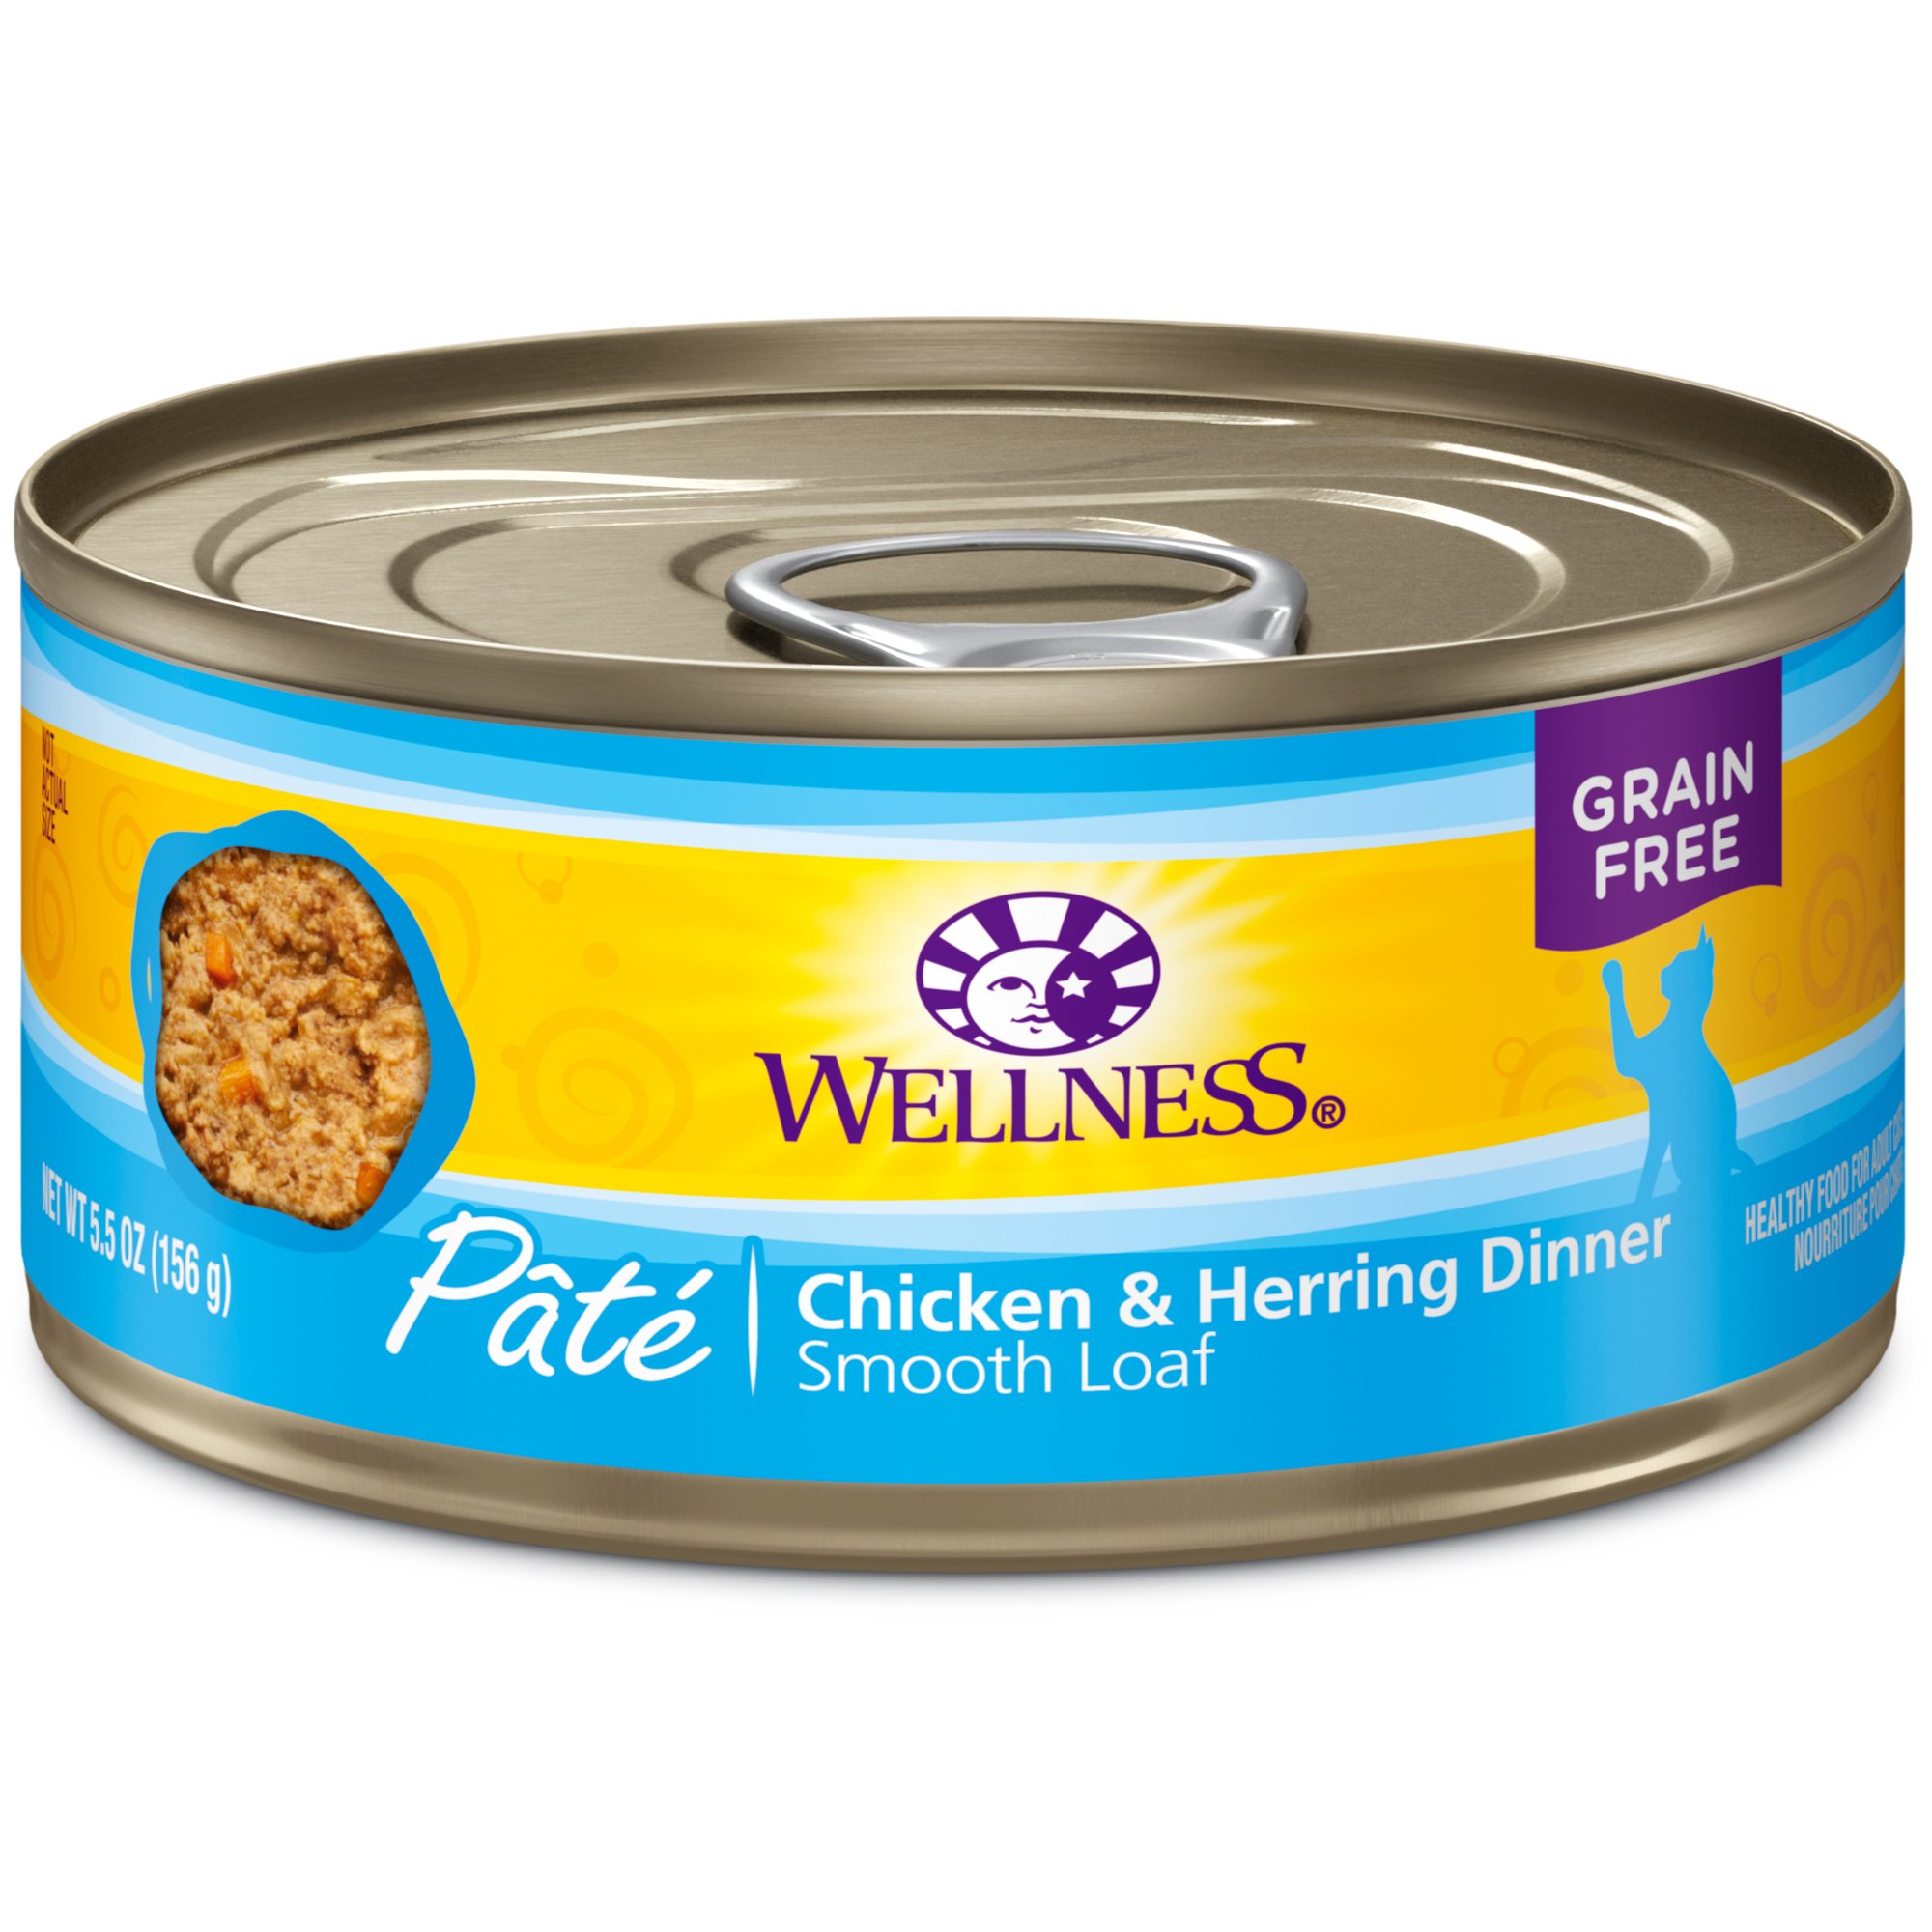 Wellness Complete Health Grain-Free Wet Canned Cat Food, Natural Ingredients, Made with Real Meat, All Breeds, Smooth Pate (Chicken & Herring, 5.5-Ounce Can, Pack of 24)